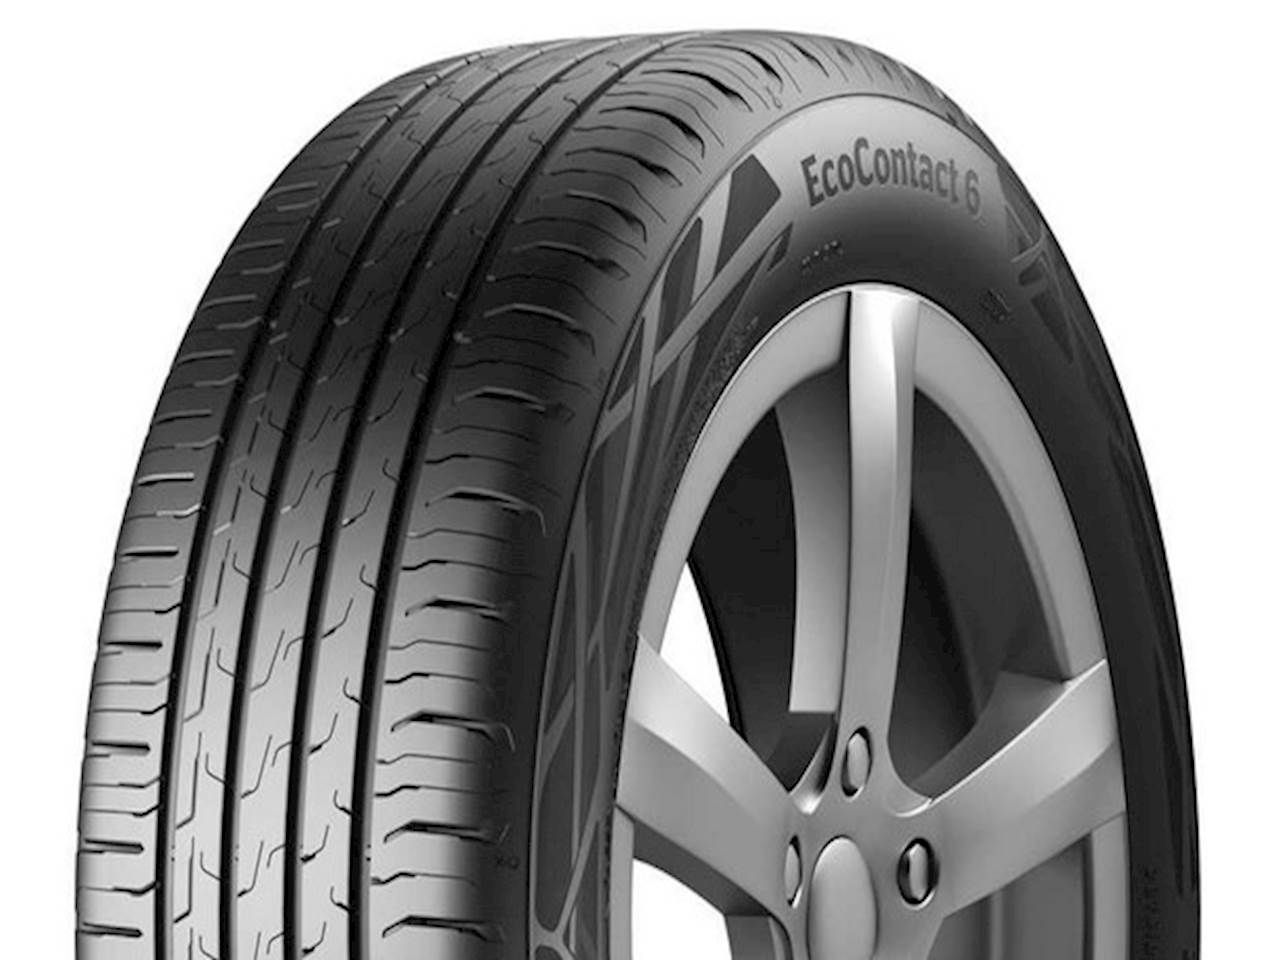 Continental Ecocontact 6 215/65 R16 98H - Wulkanista.pl